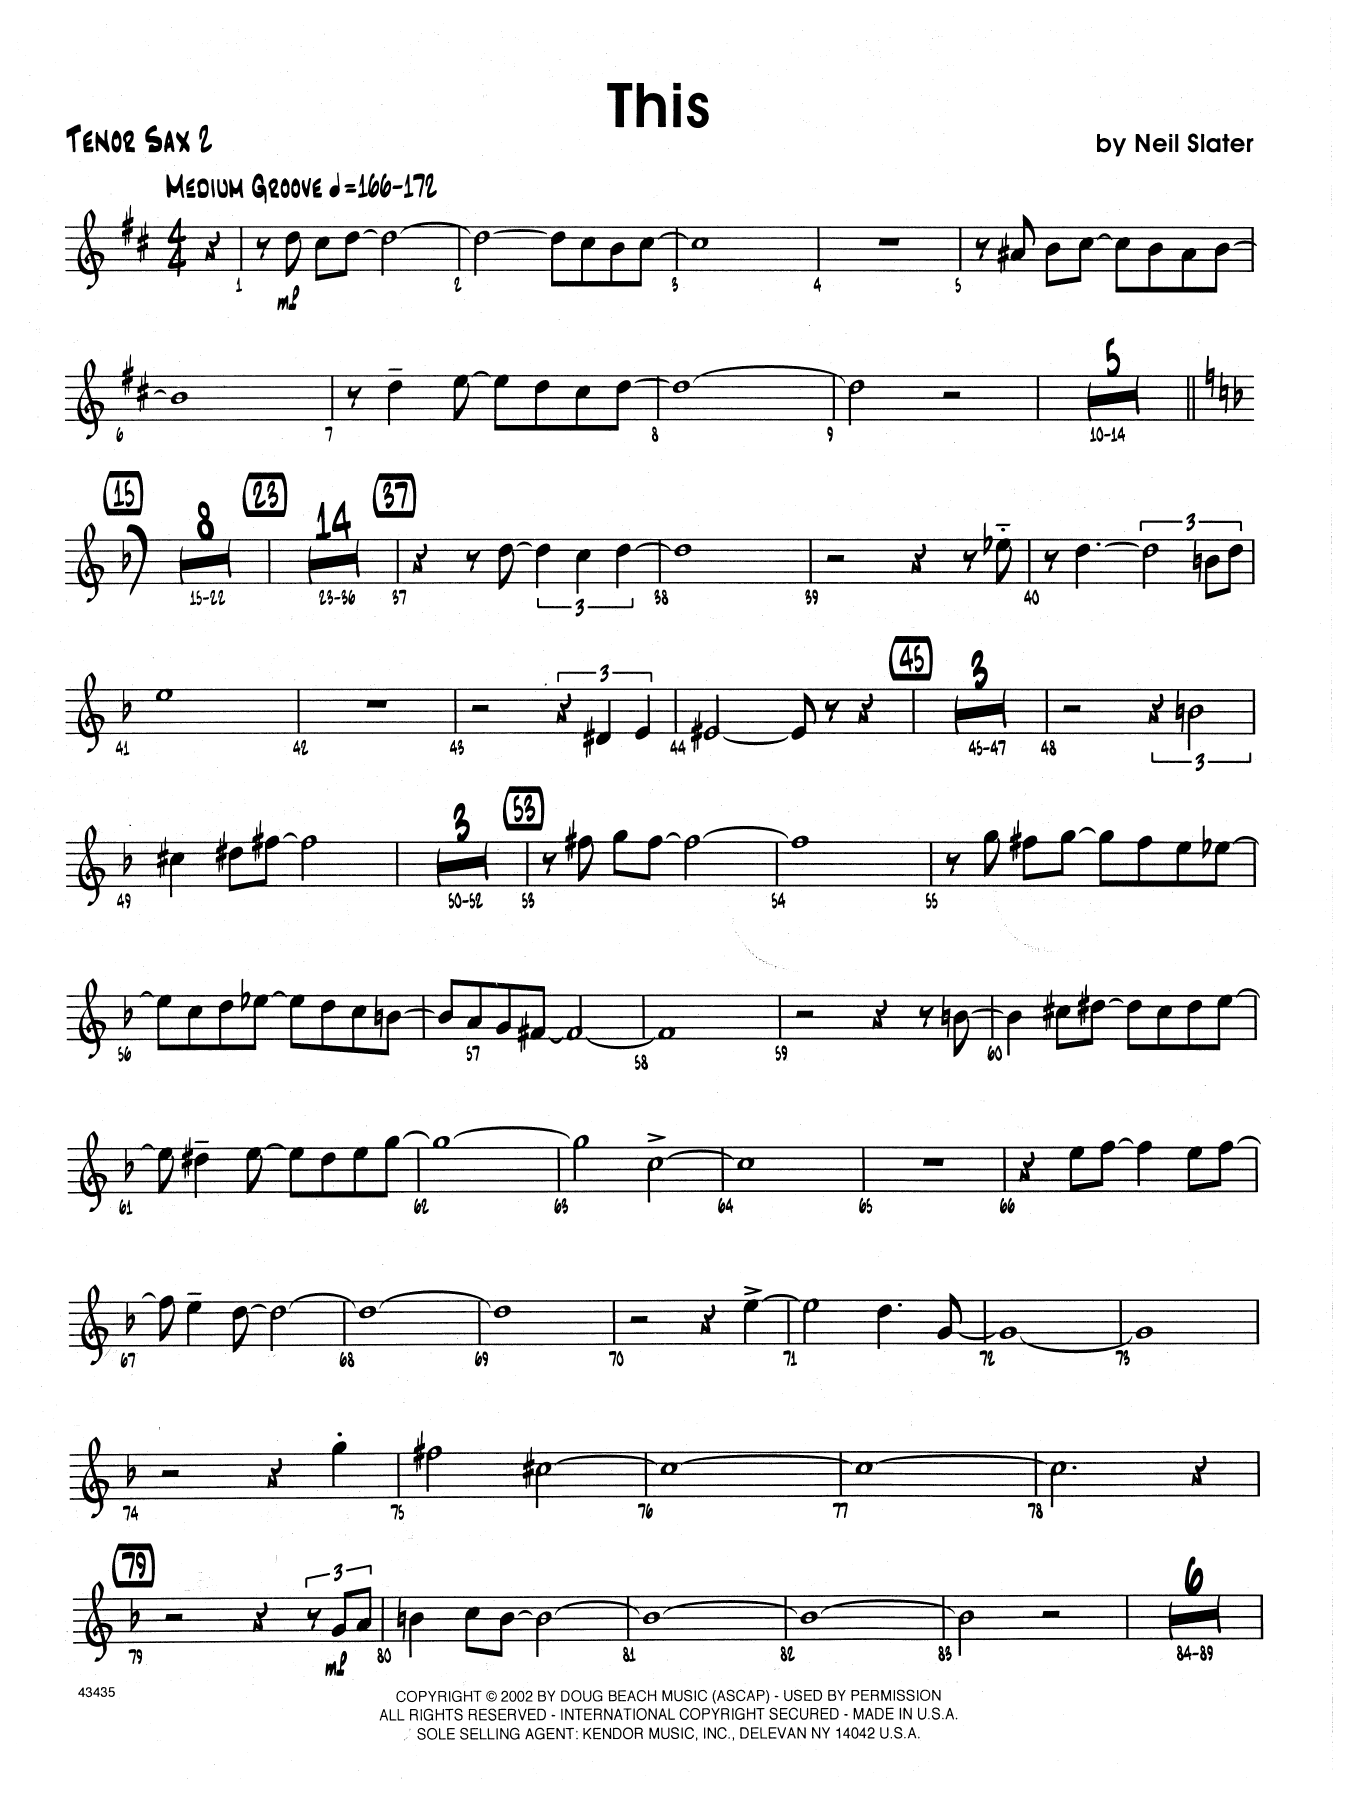 Download Neil Slater This - 2nd Bb Tenor Saxophone Sheet Music